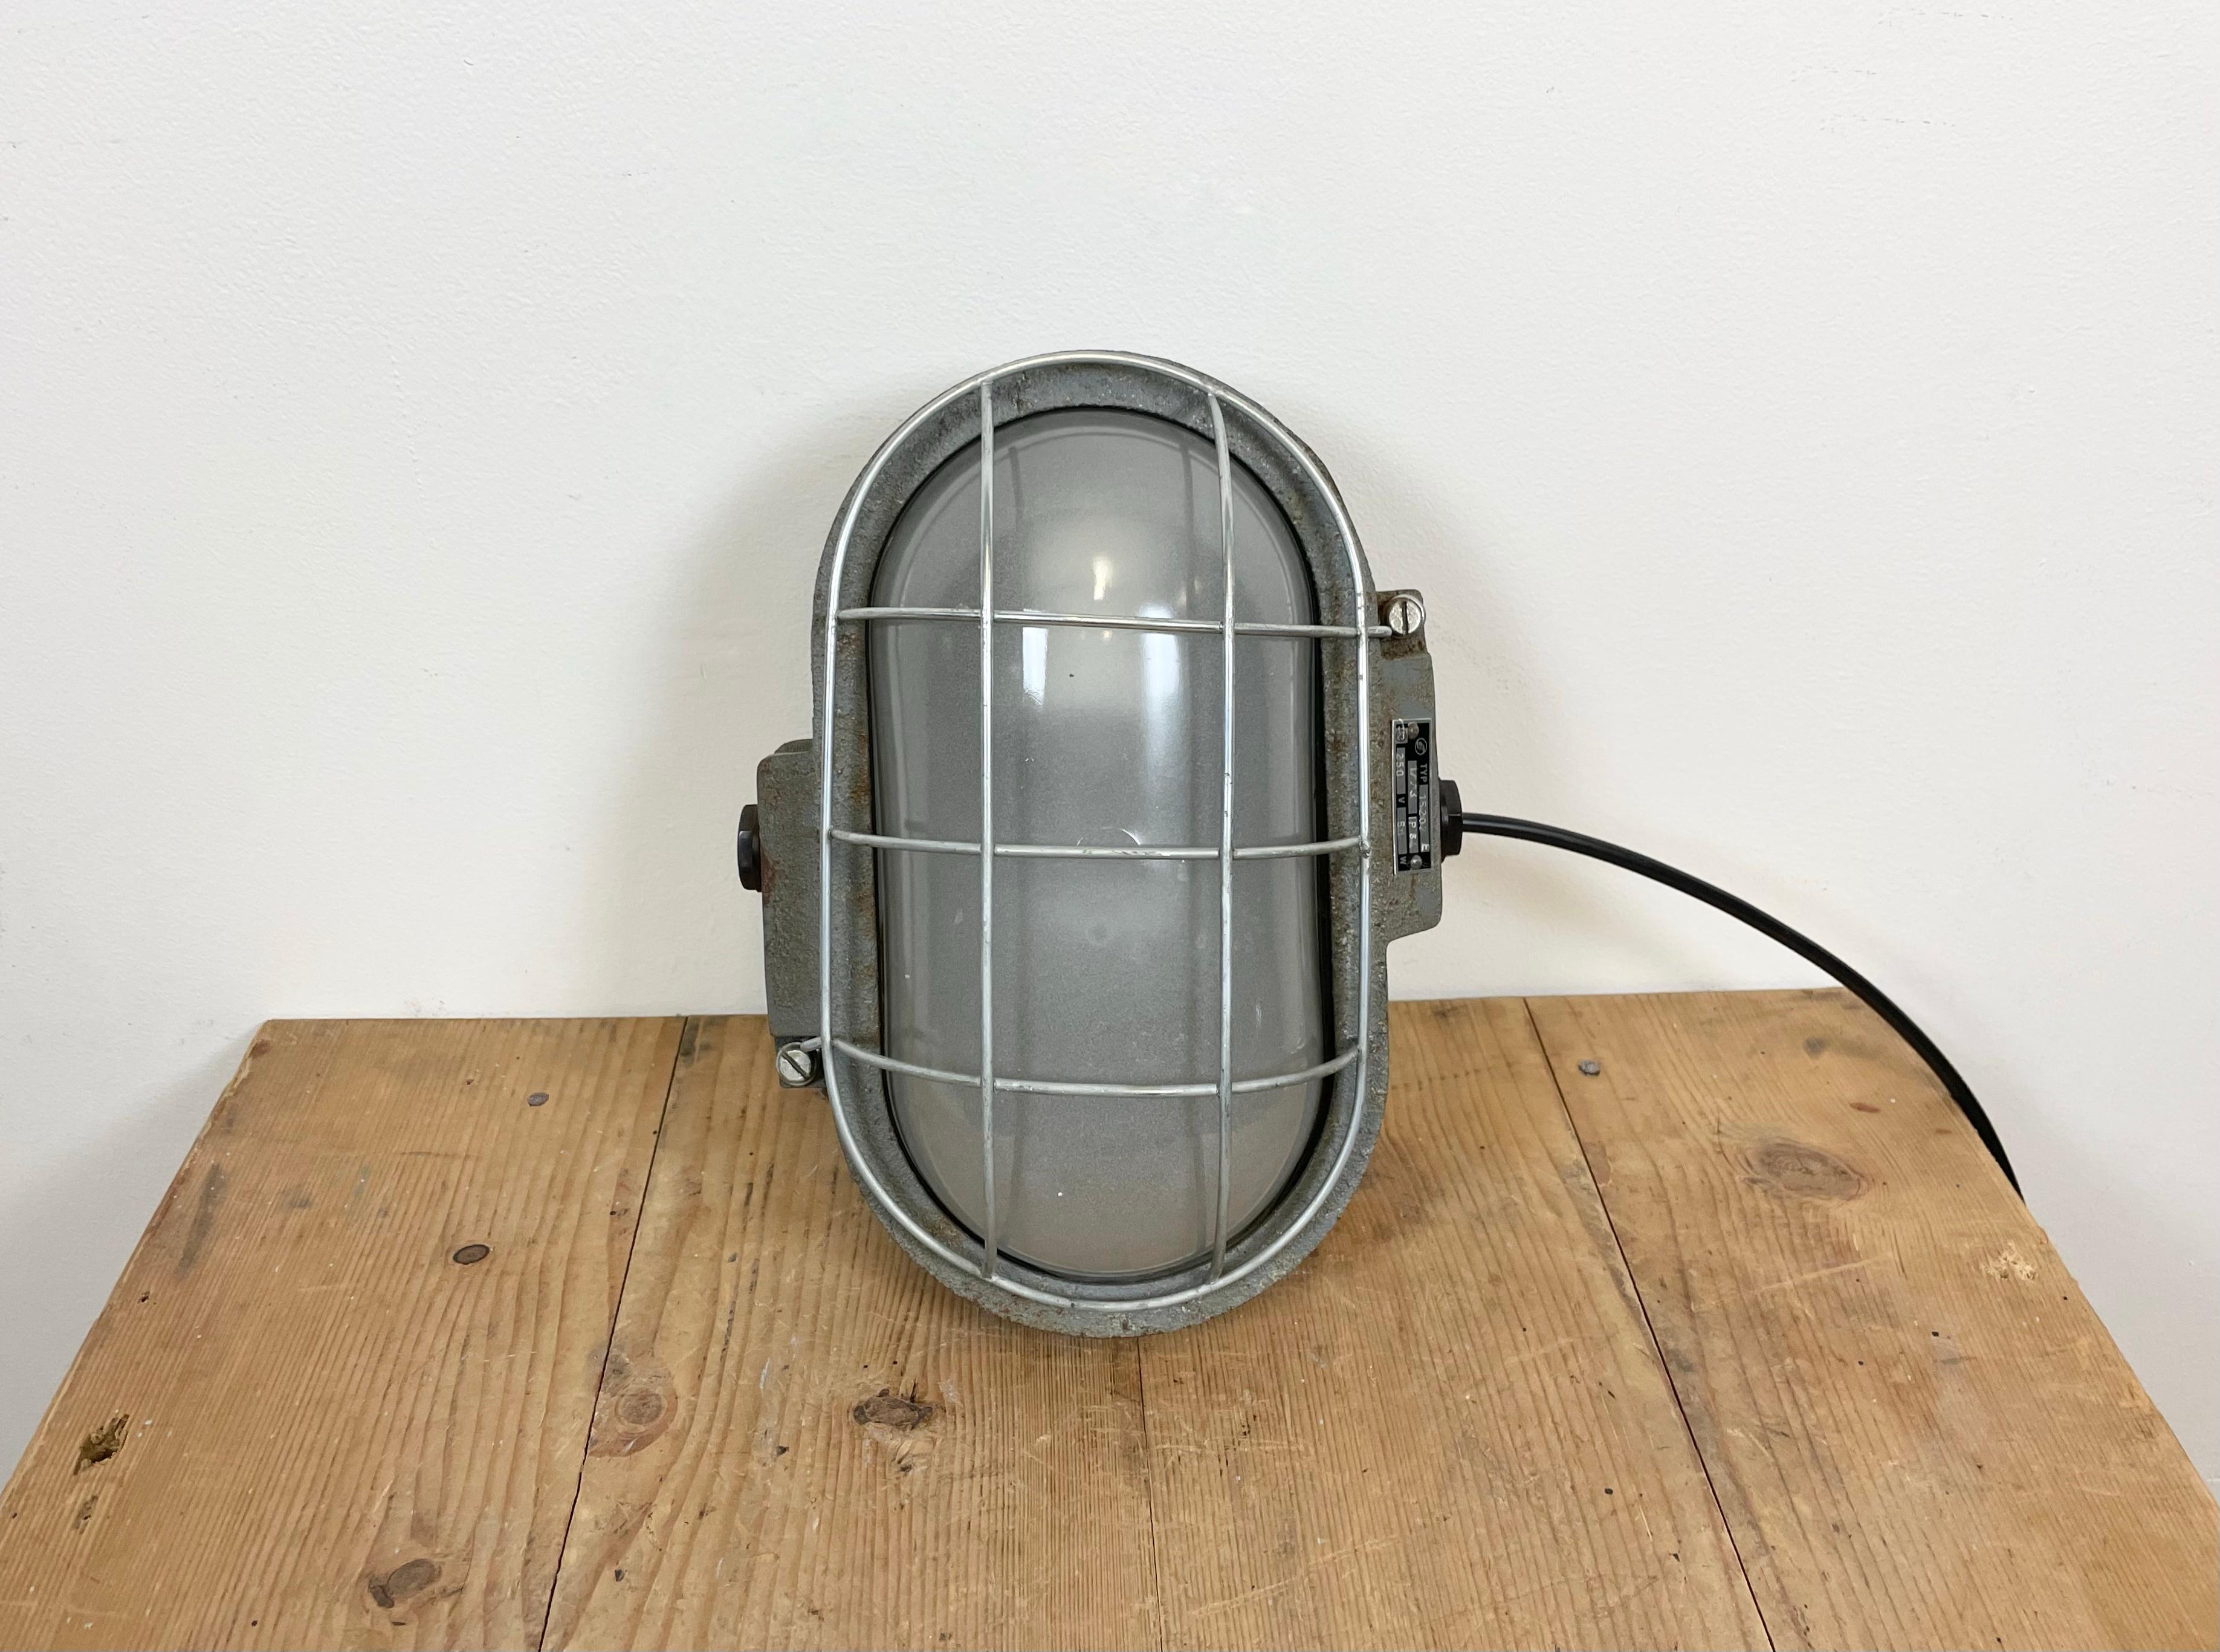 Industrial wall light made by Elektrosvit in former Czechoslovakia during the 1970s. It features a cast iron body, a milk glass cover and a steel grid.The porcelain socket requires E 27 lightbulbs. New wire. The weight of the lamp is 5 kg.